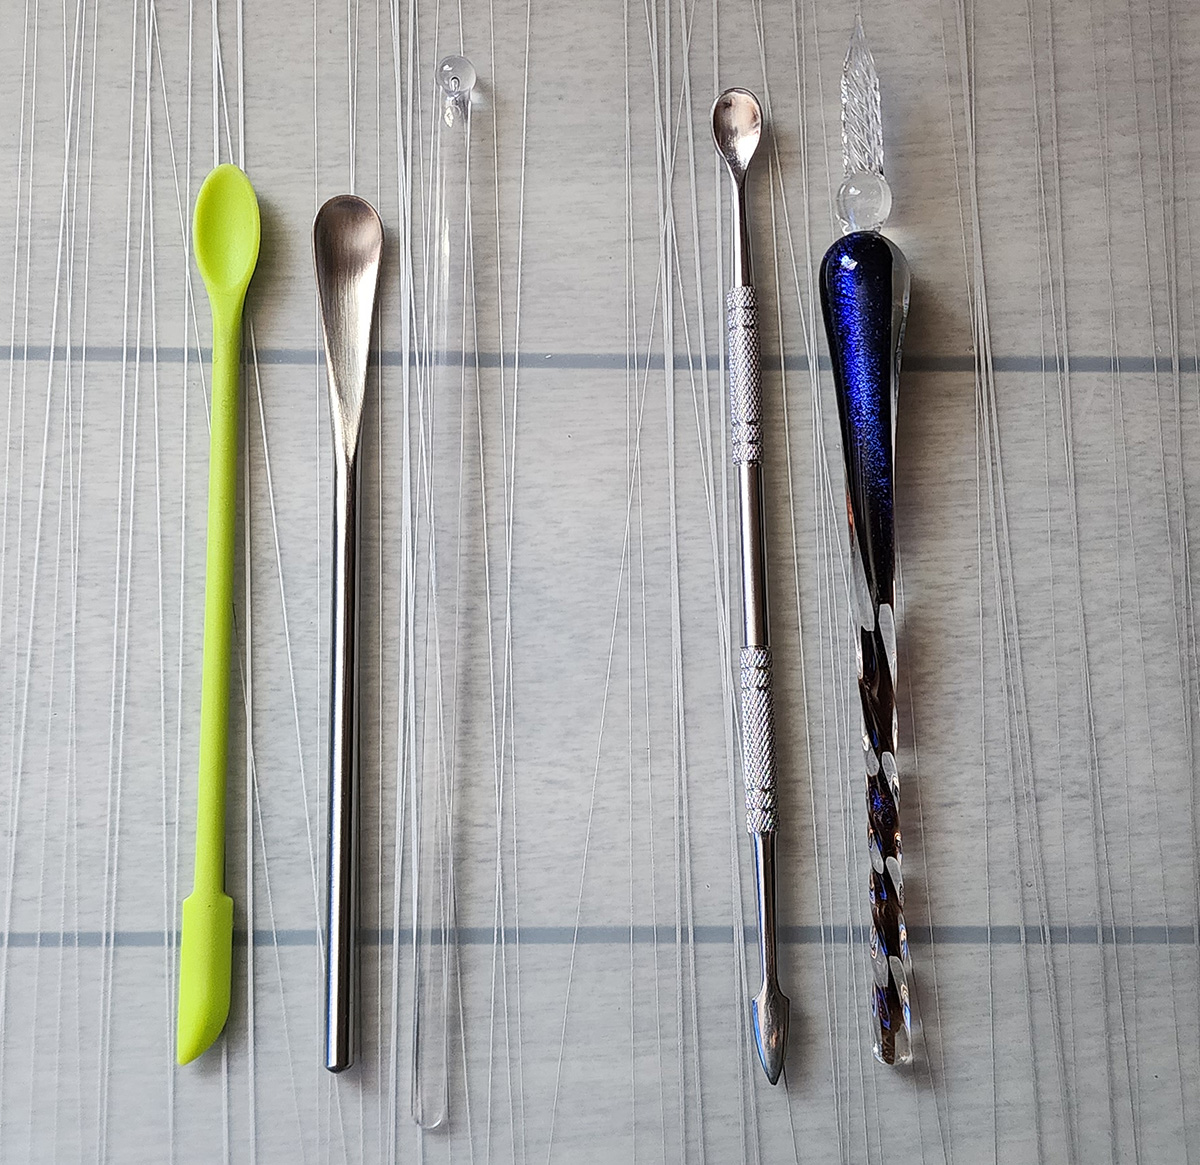 Five other tools placed on a desk, a bright green silicone tool with a narrow spoon on one end and a small scraper tip on other, a metal drink stirrer with an elongated narrow spoon end and and straight circular handle ending in a shallow curve, a clear plastic drink stirrer with a flat stick and small round ball at the end, a metal hand tool with a round spoon at one end and an arrow-shaped point at the other, and a glass dip nib pen with a long twisted glass nib, a bulbous grip, and a tapering twisted handle ending in a narrow rounded tip.